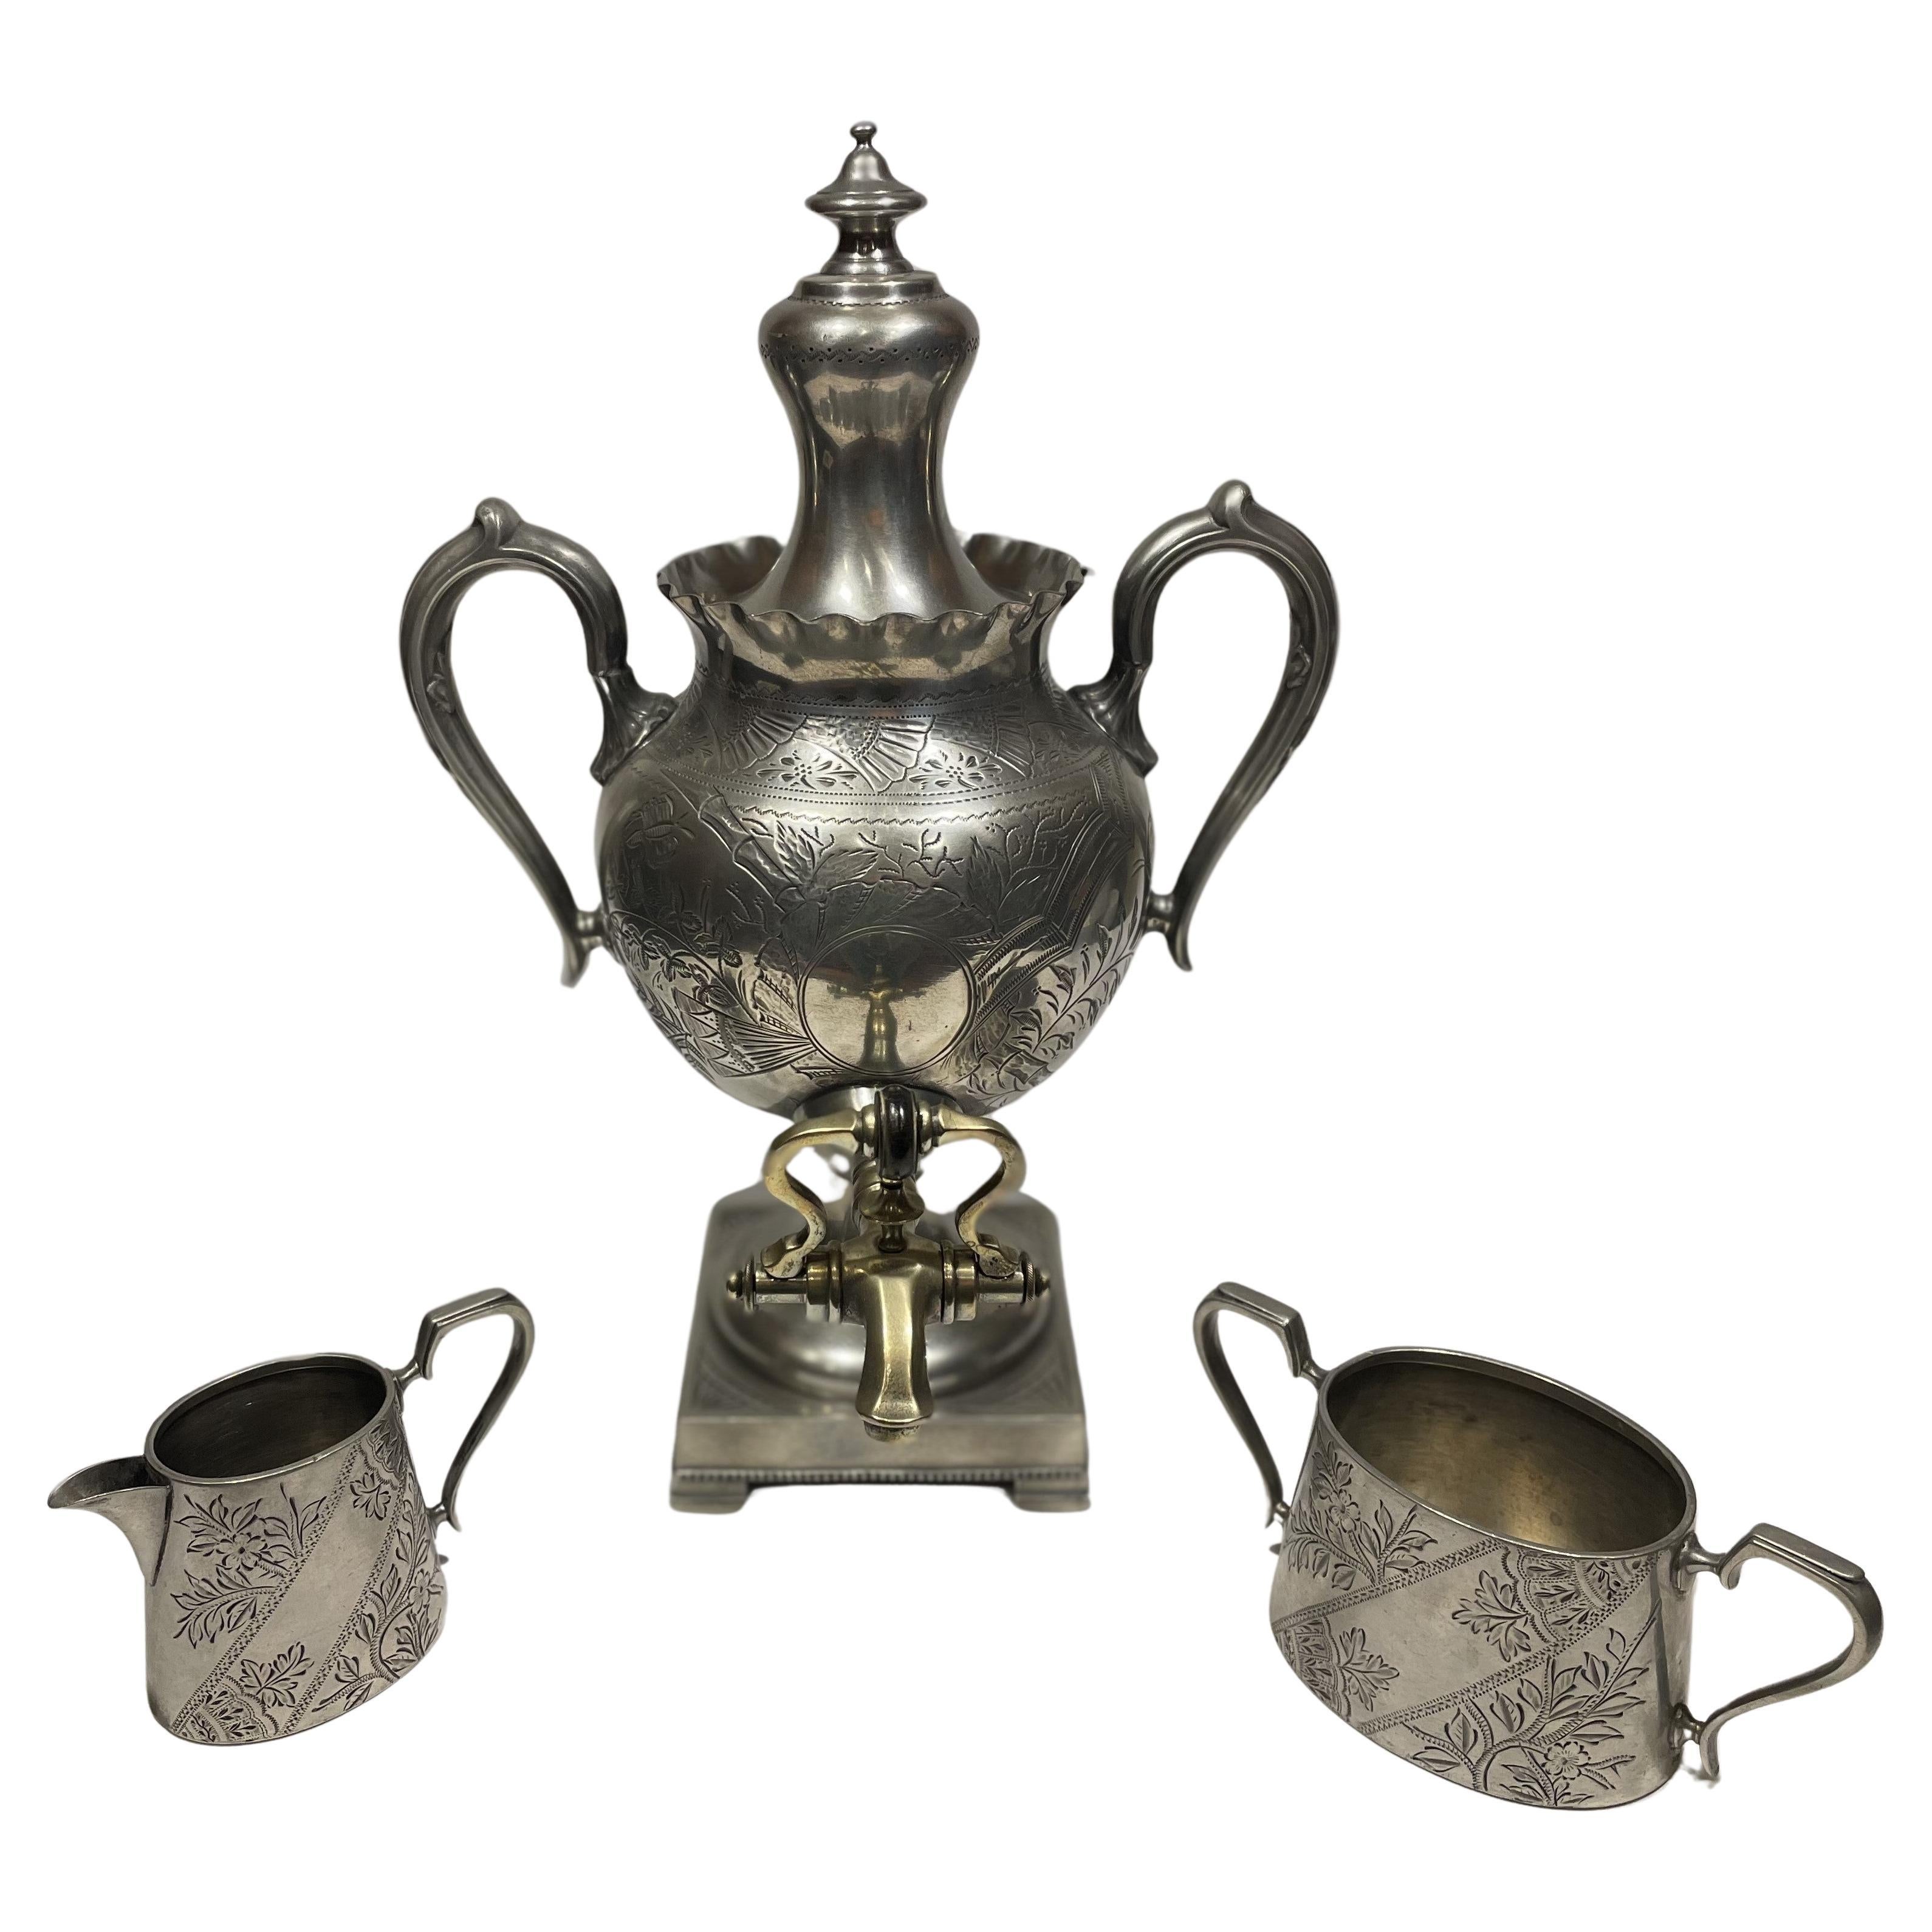 Dating to 1870 and made in Sheffield, England, a locale well known for its silver design and production, this is an extremely well-preserved three-piece pewter and brass tea service. It consists of a stately and sizable tea urn, with matching sugar